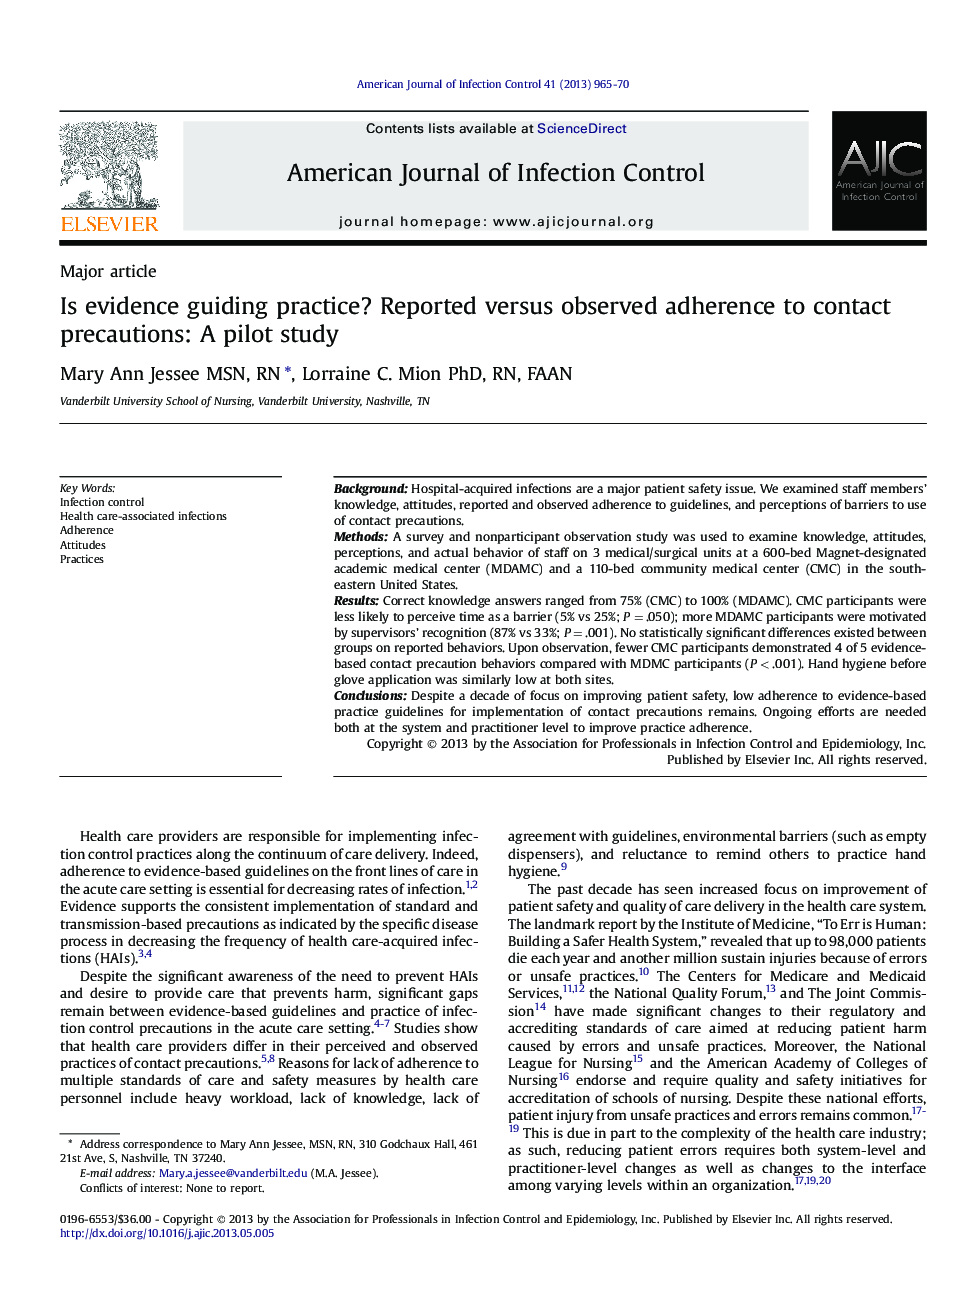 Is evidence guiding practice? Reported versus observed adherence to contact precautions: A pilot study 